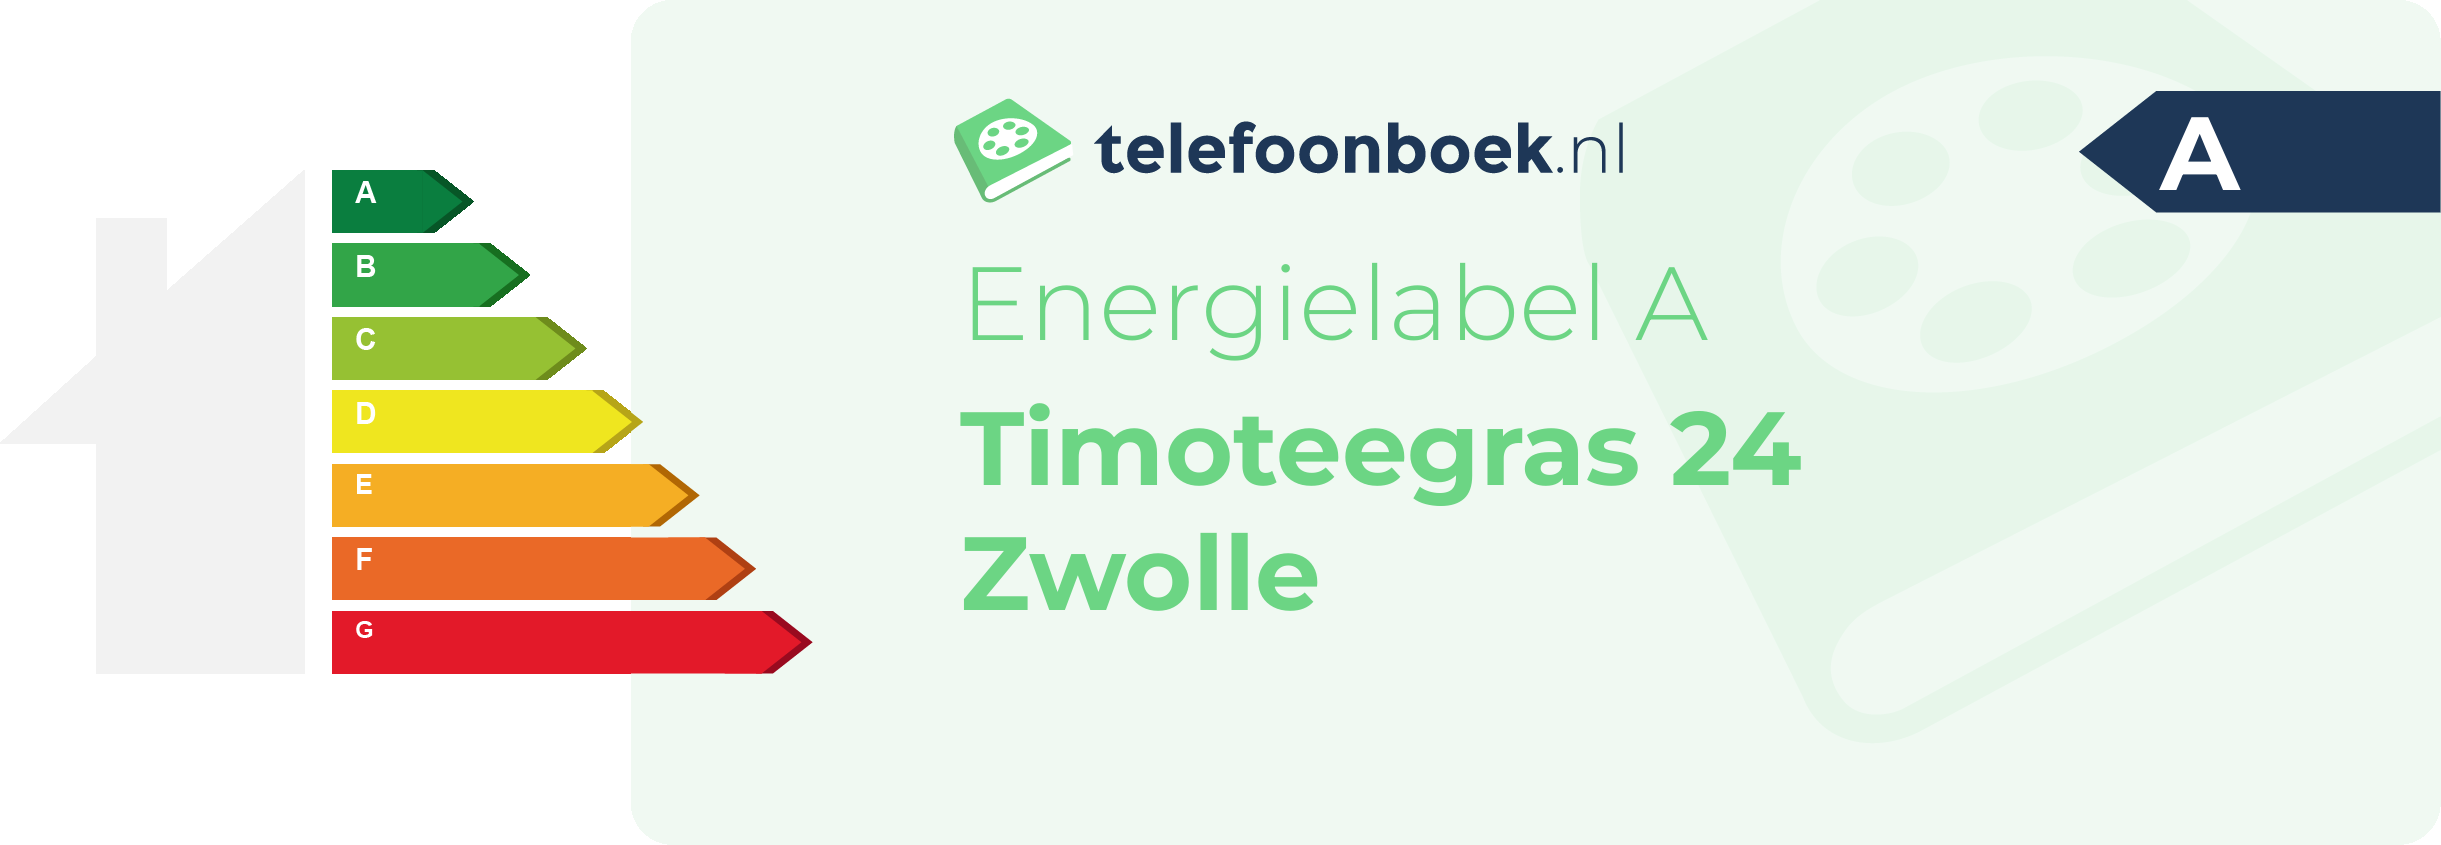 Energielabel Timoteegras 24 Zwolle